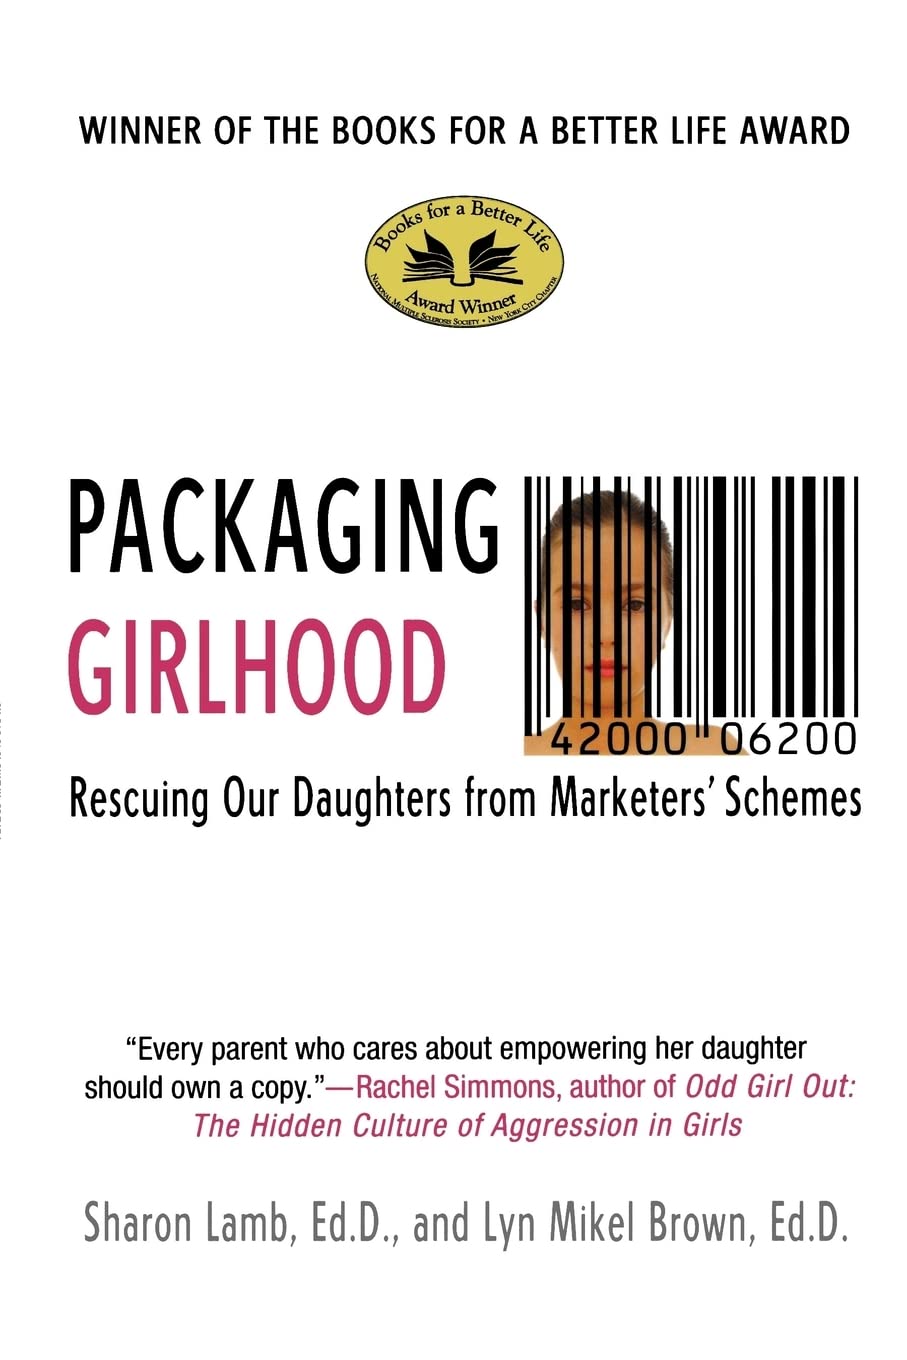 Packaging Girlhood: Rescuing Our Daughters from Marketers' Schemes